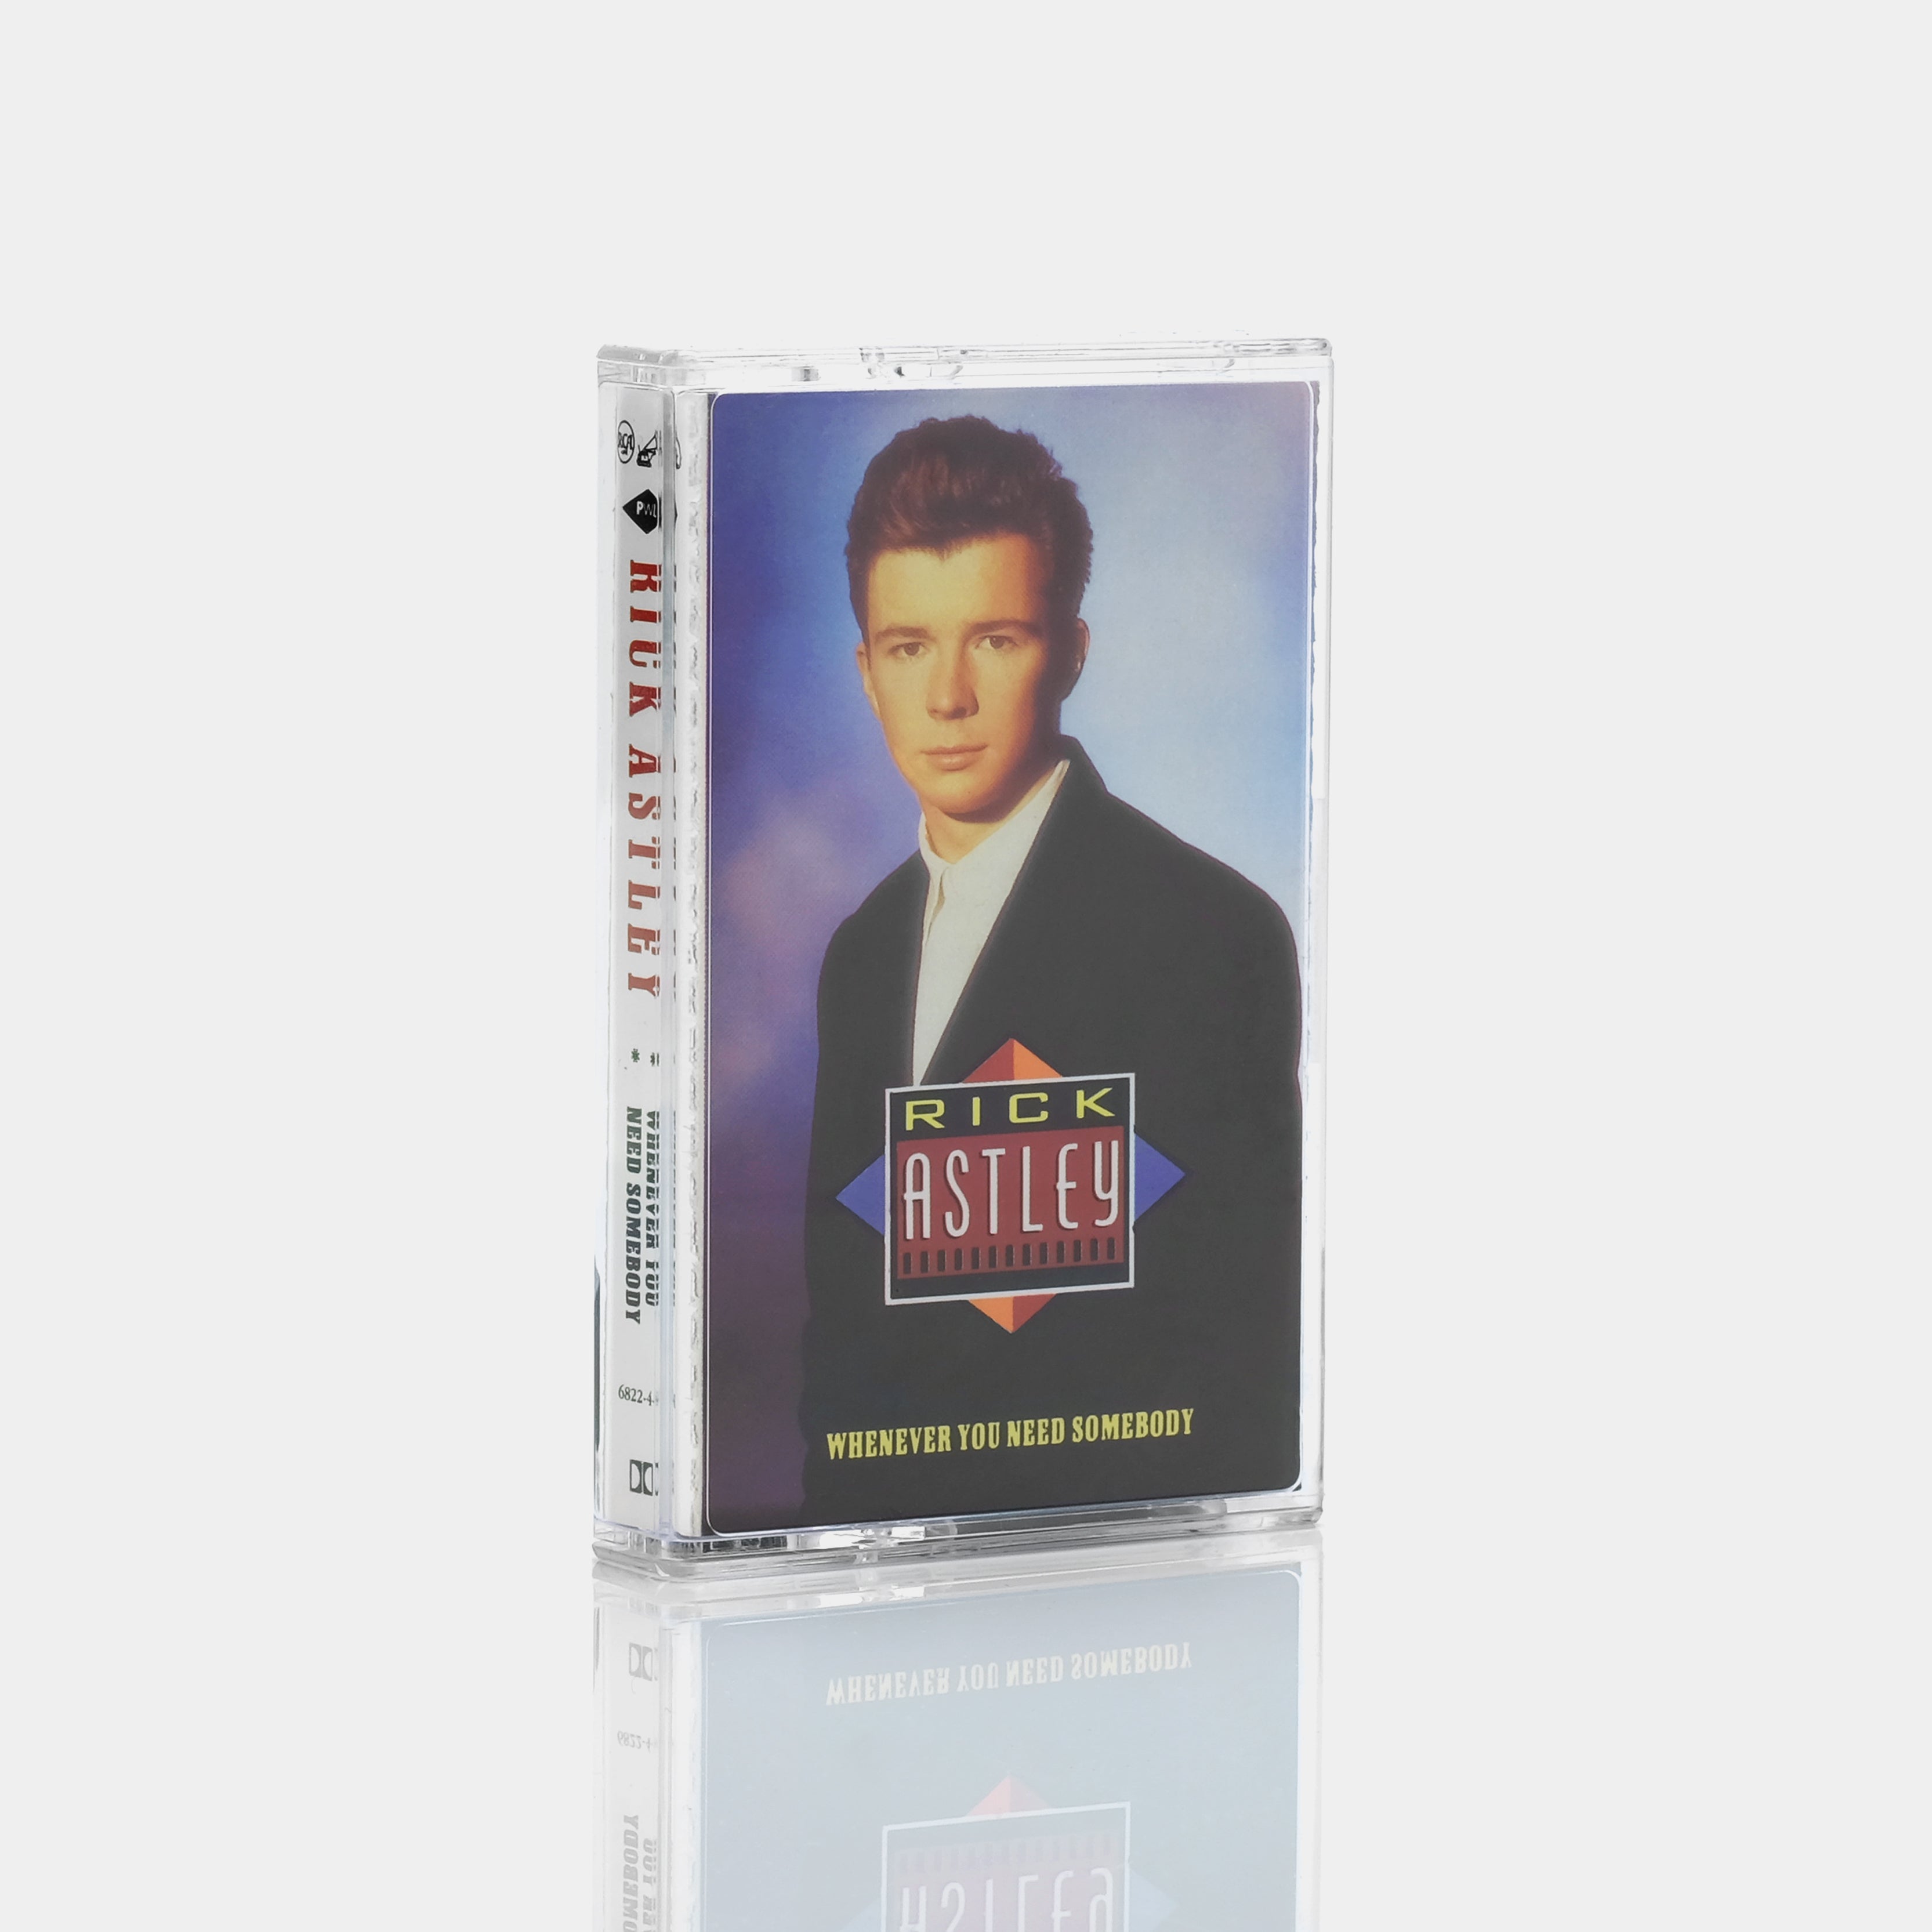 Rick Astley - Whenever You Need Somebody Cassette Tape